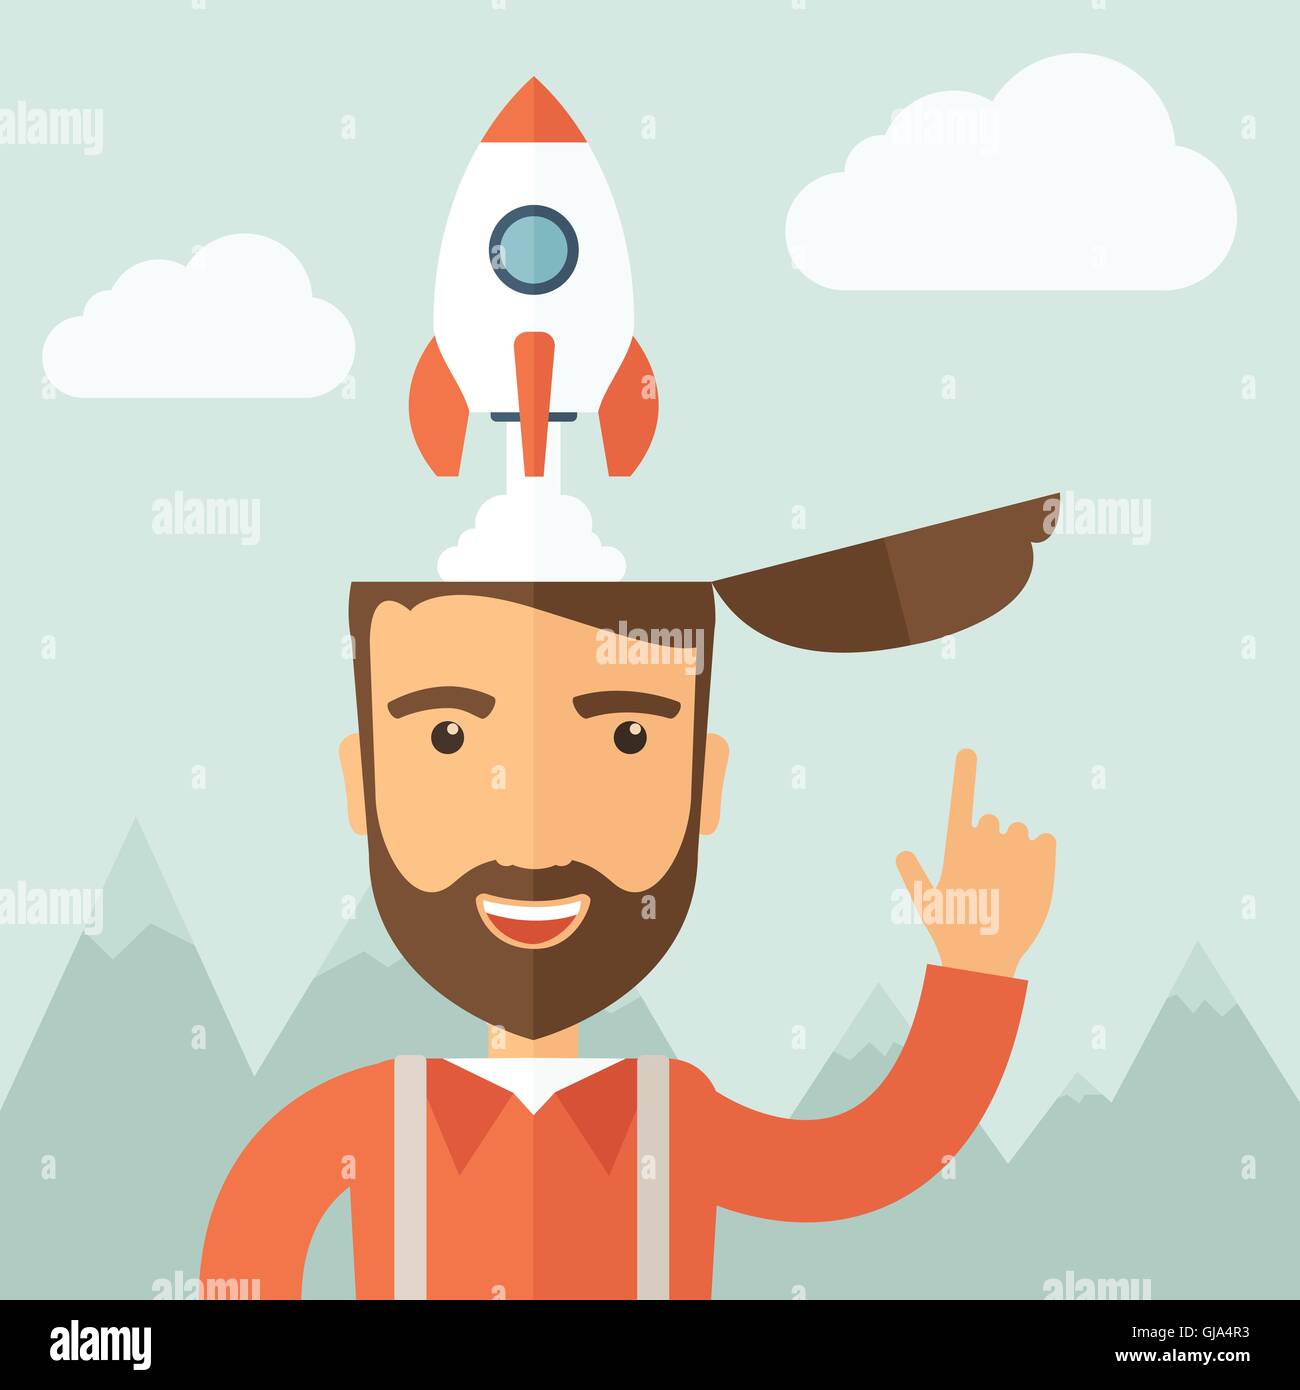 Startup concept Stock Vector